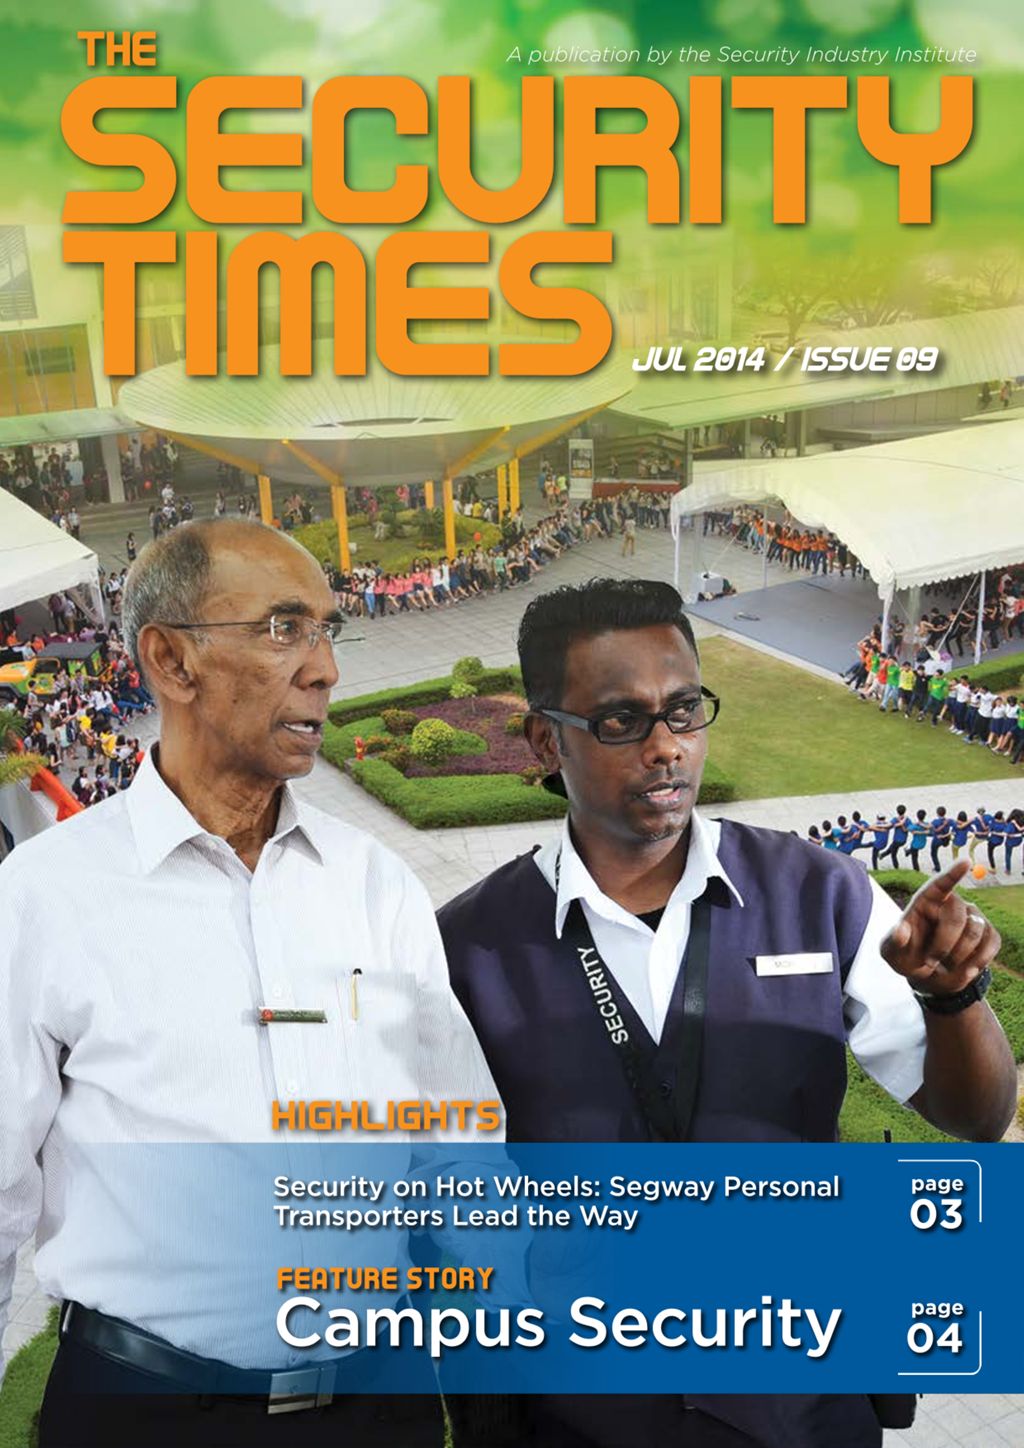 The Security Times : a <em>publication</em> by the Security Industry Institute. Jul. 2014. Issue 09